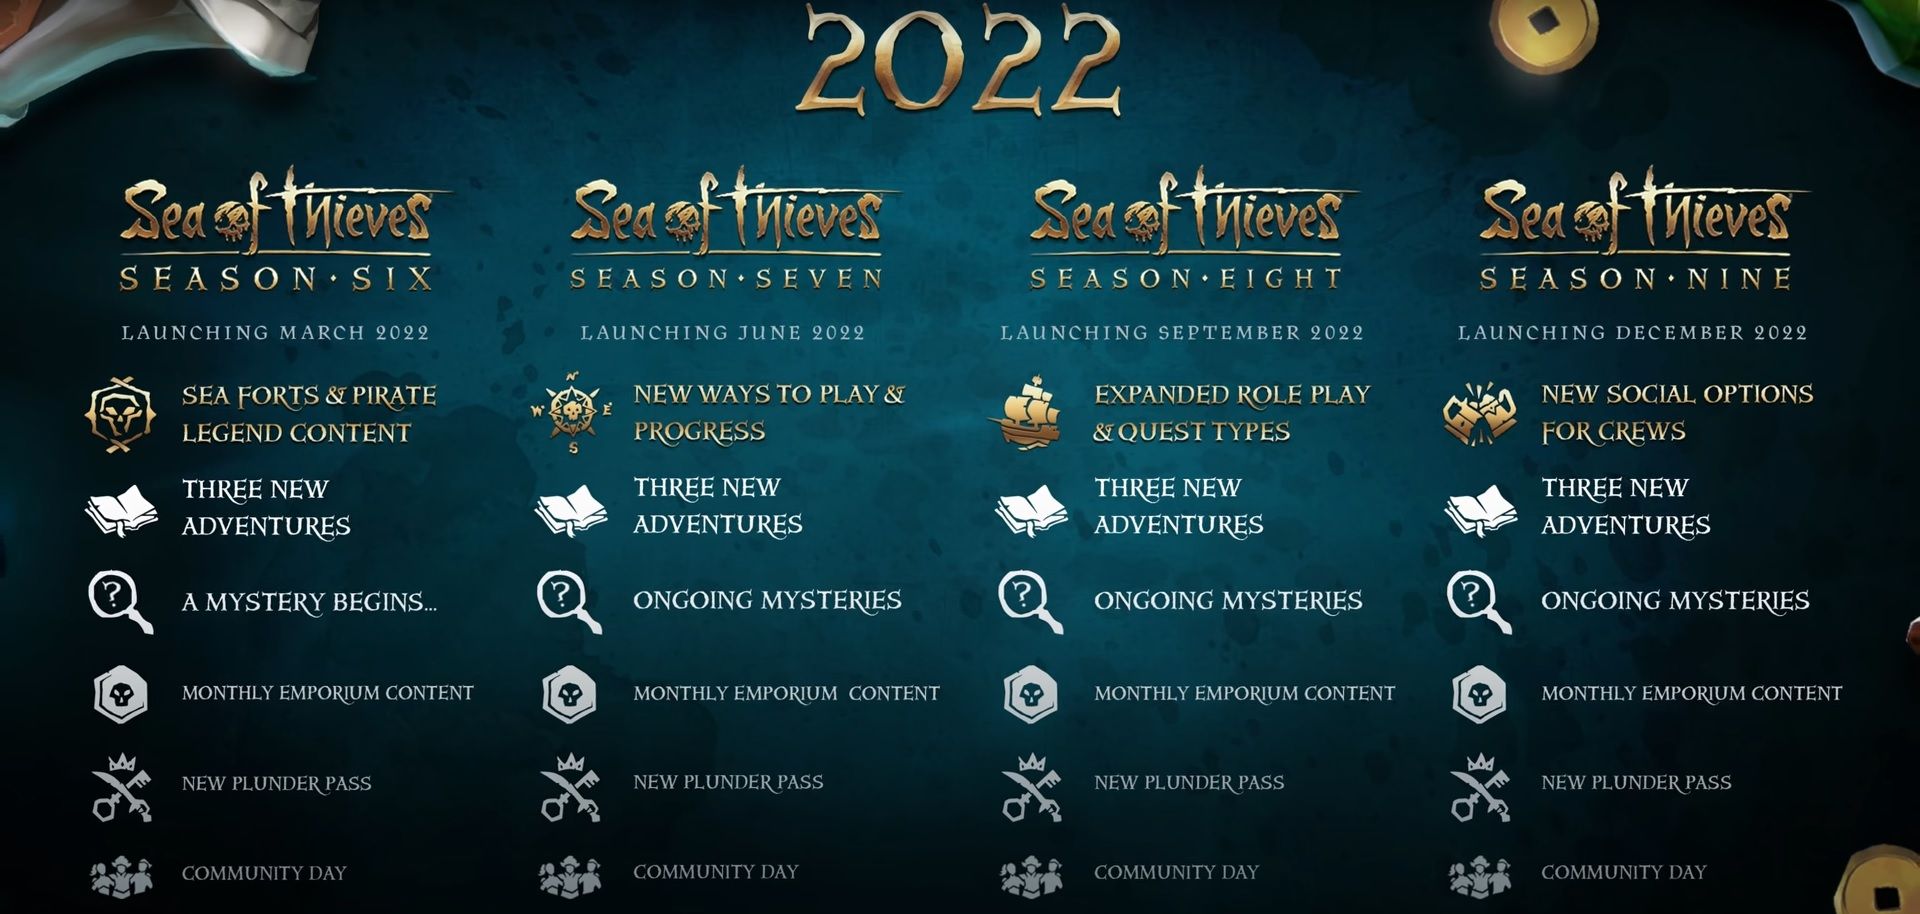 Sea of Thieves 2022 Roadmap Shows What's Coming in Seasons 6, 7, 8, and 9